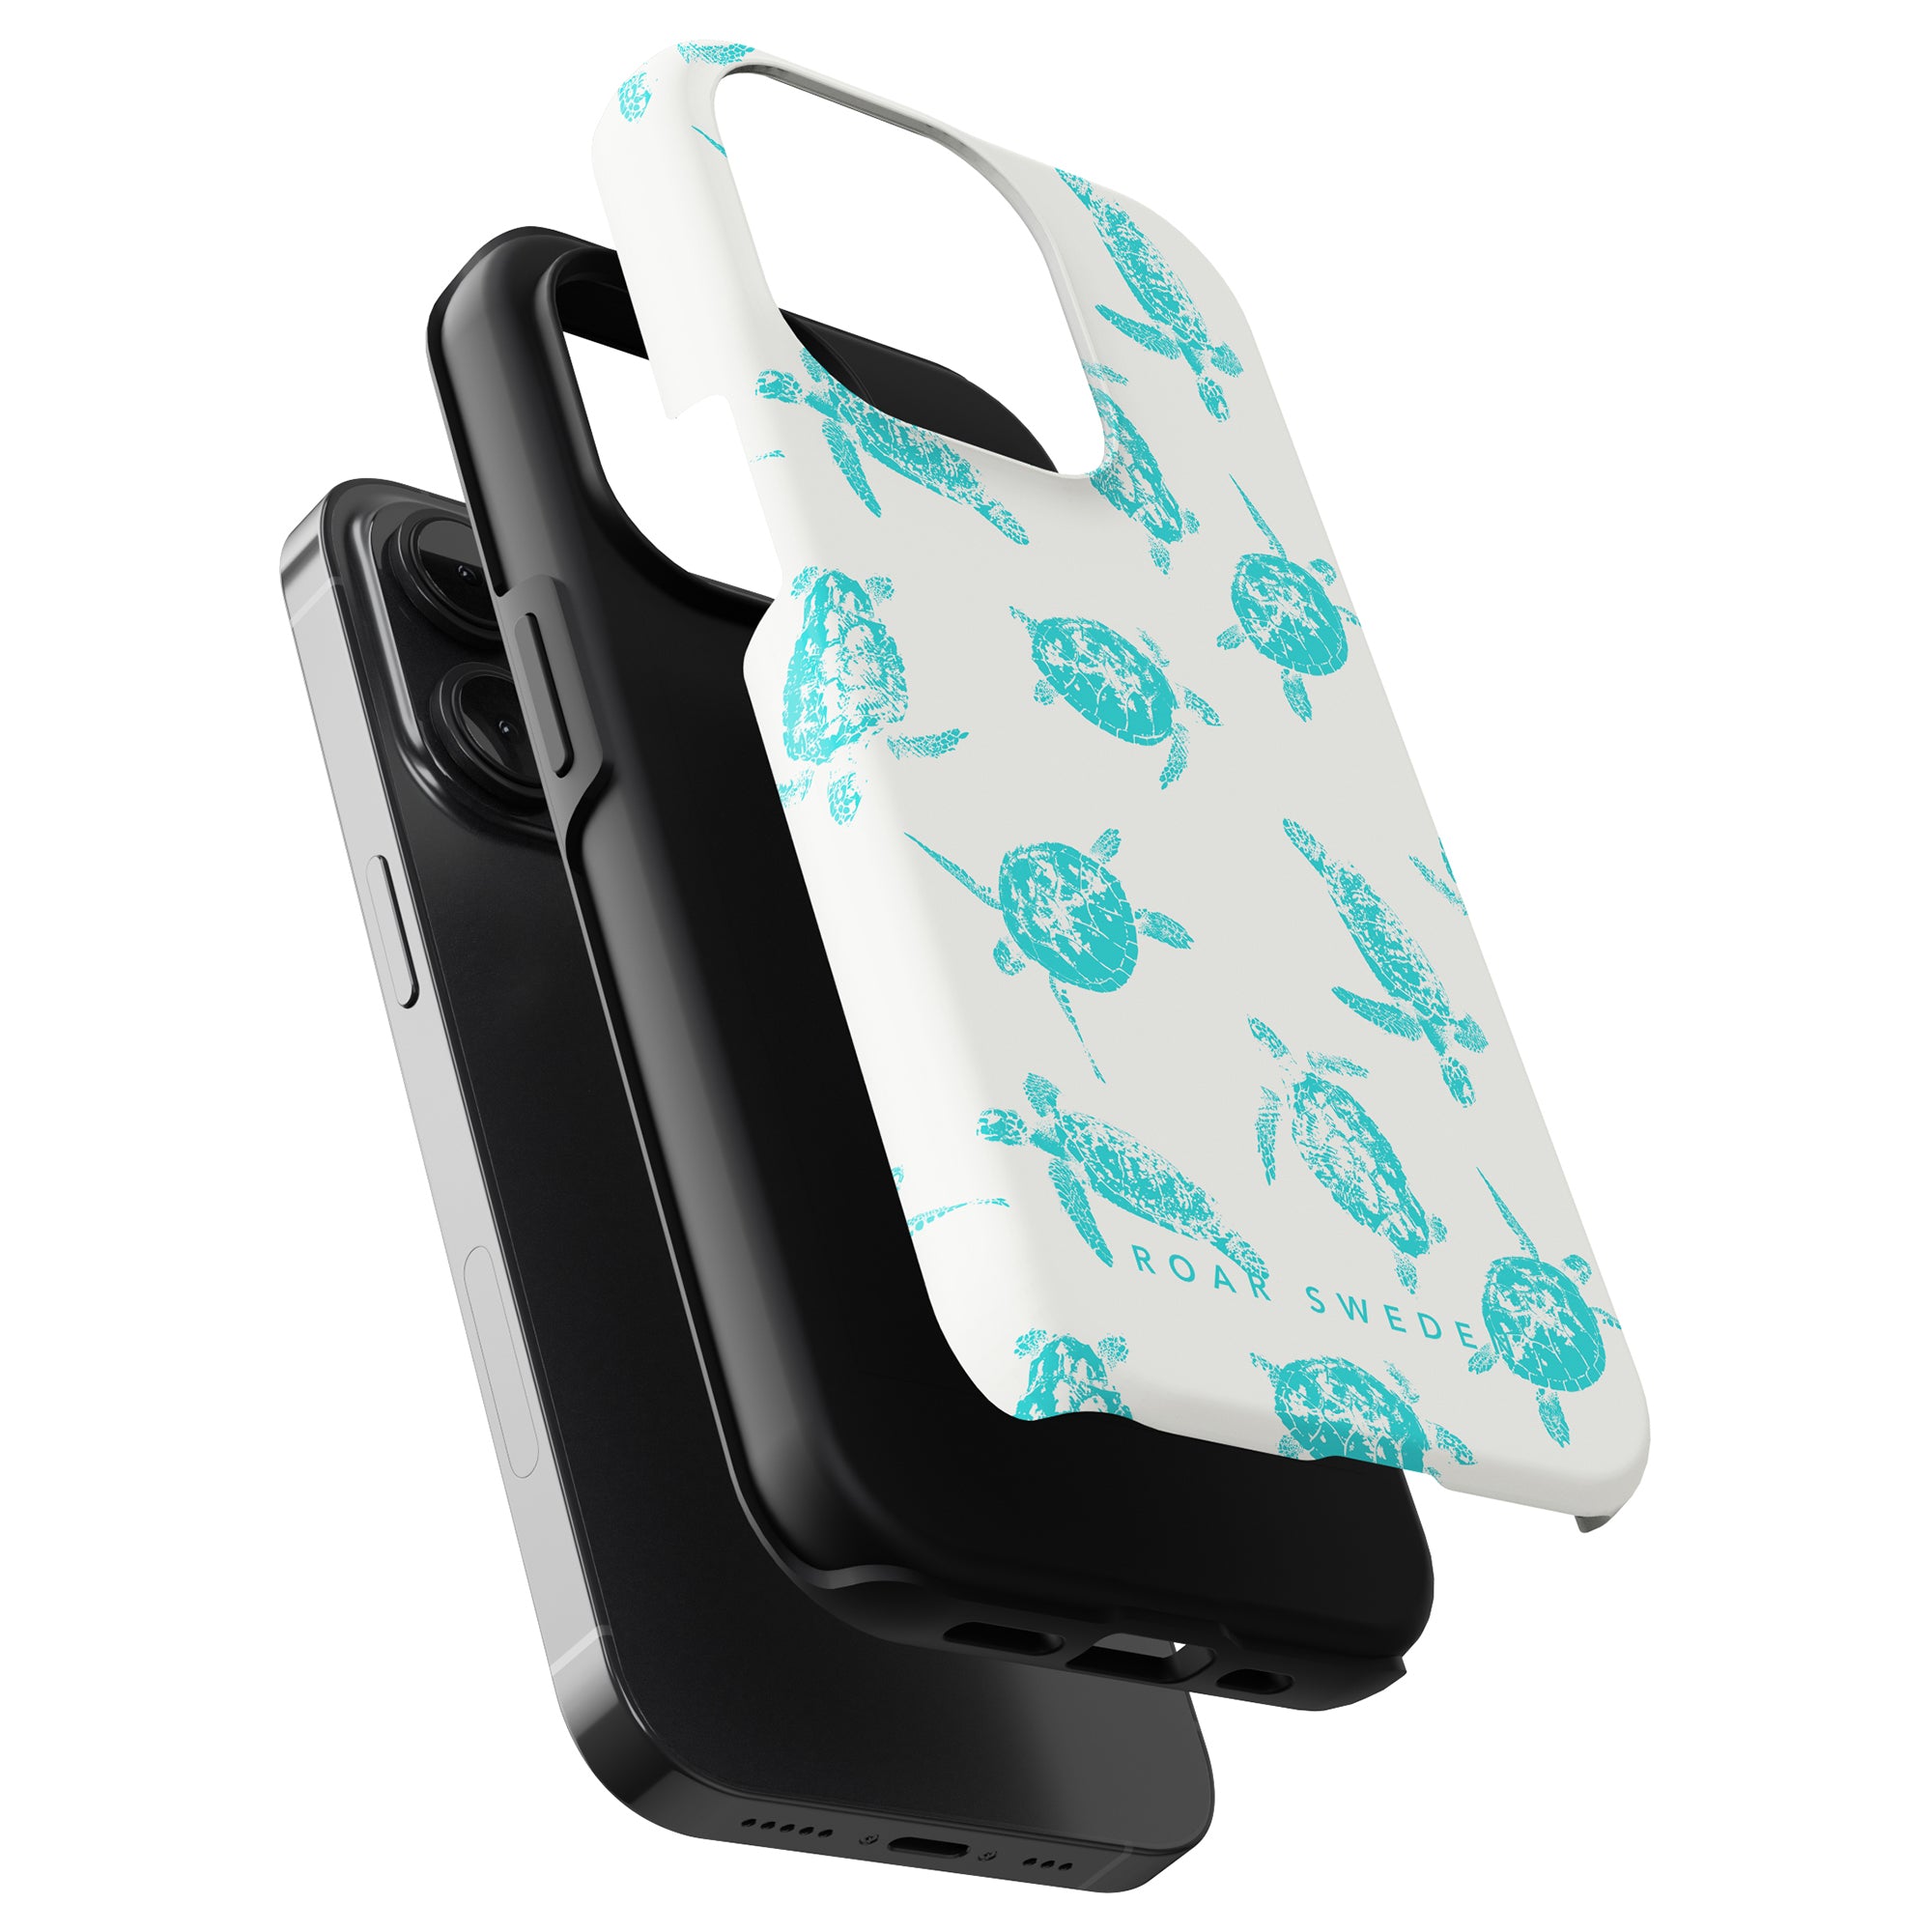 A black smartphone with a Sea Turtles - Tough Case from the ocean collection, attached to a portable battery pack.